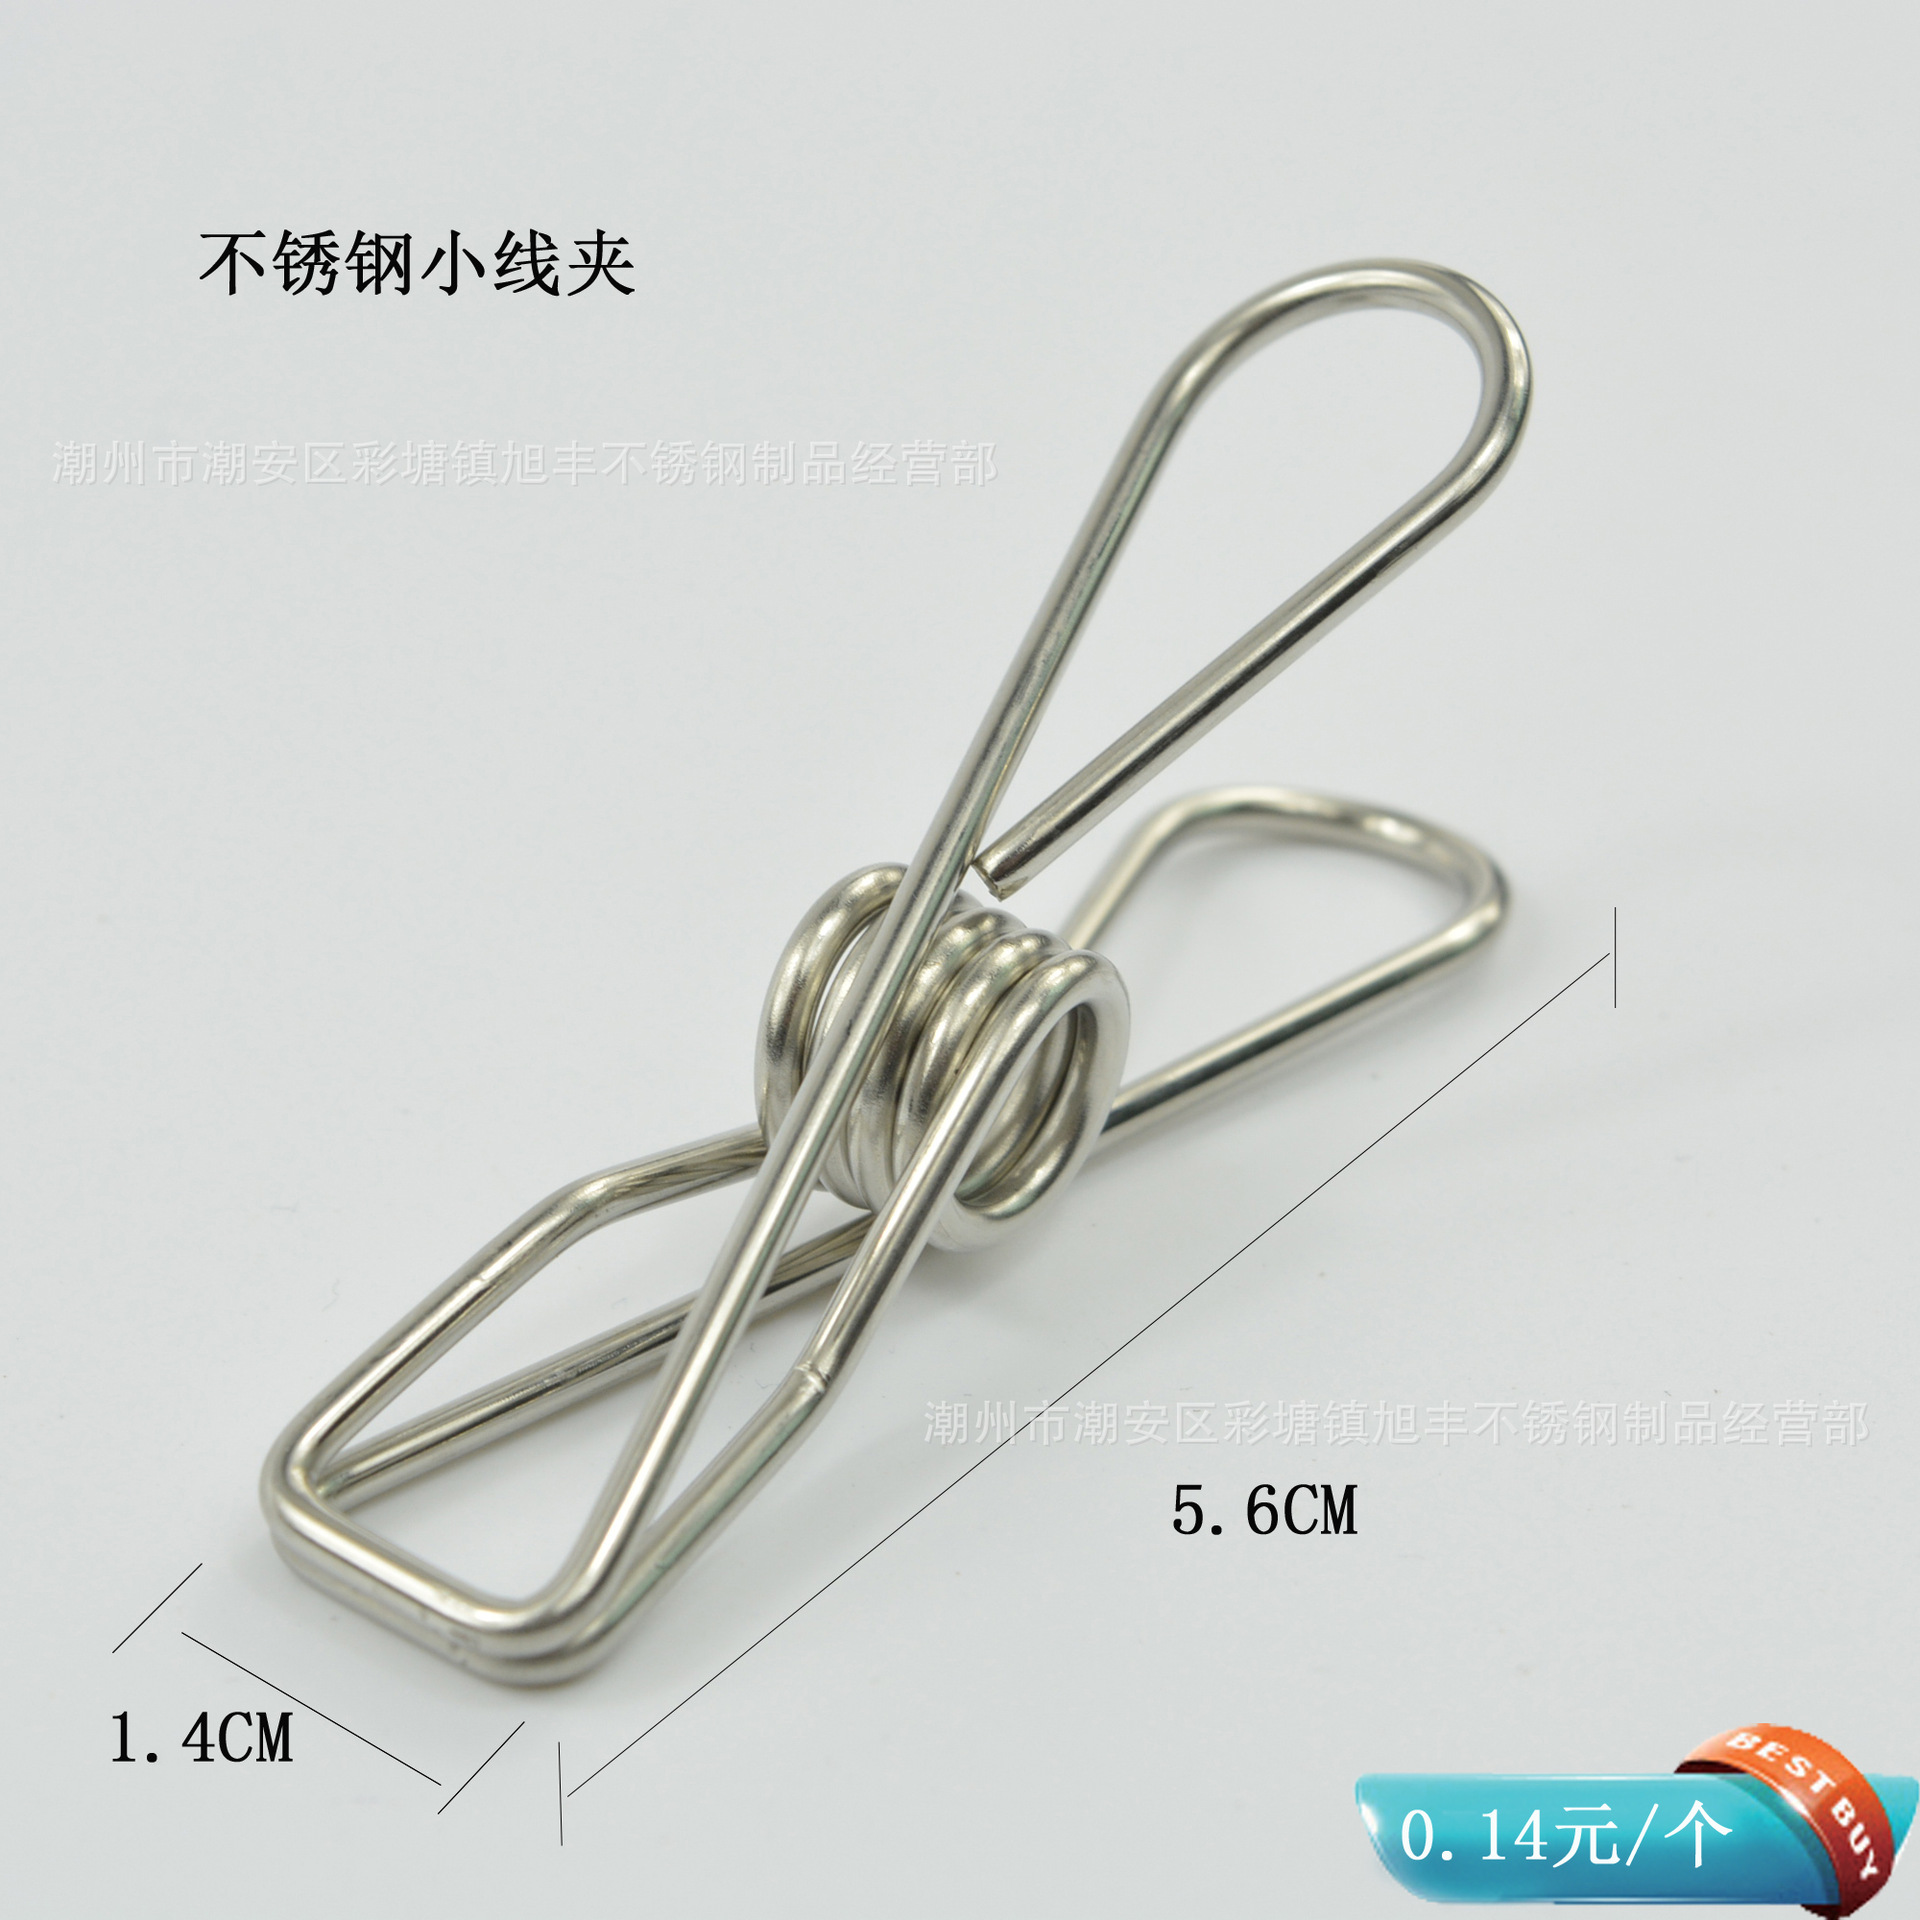 Factory Direct Sales! Stainless Steel Quilt Clip Clothes Peg Drying Clothespin 20 Pieces